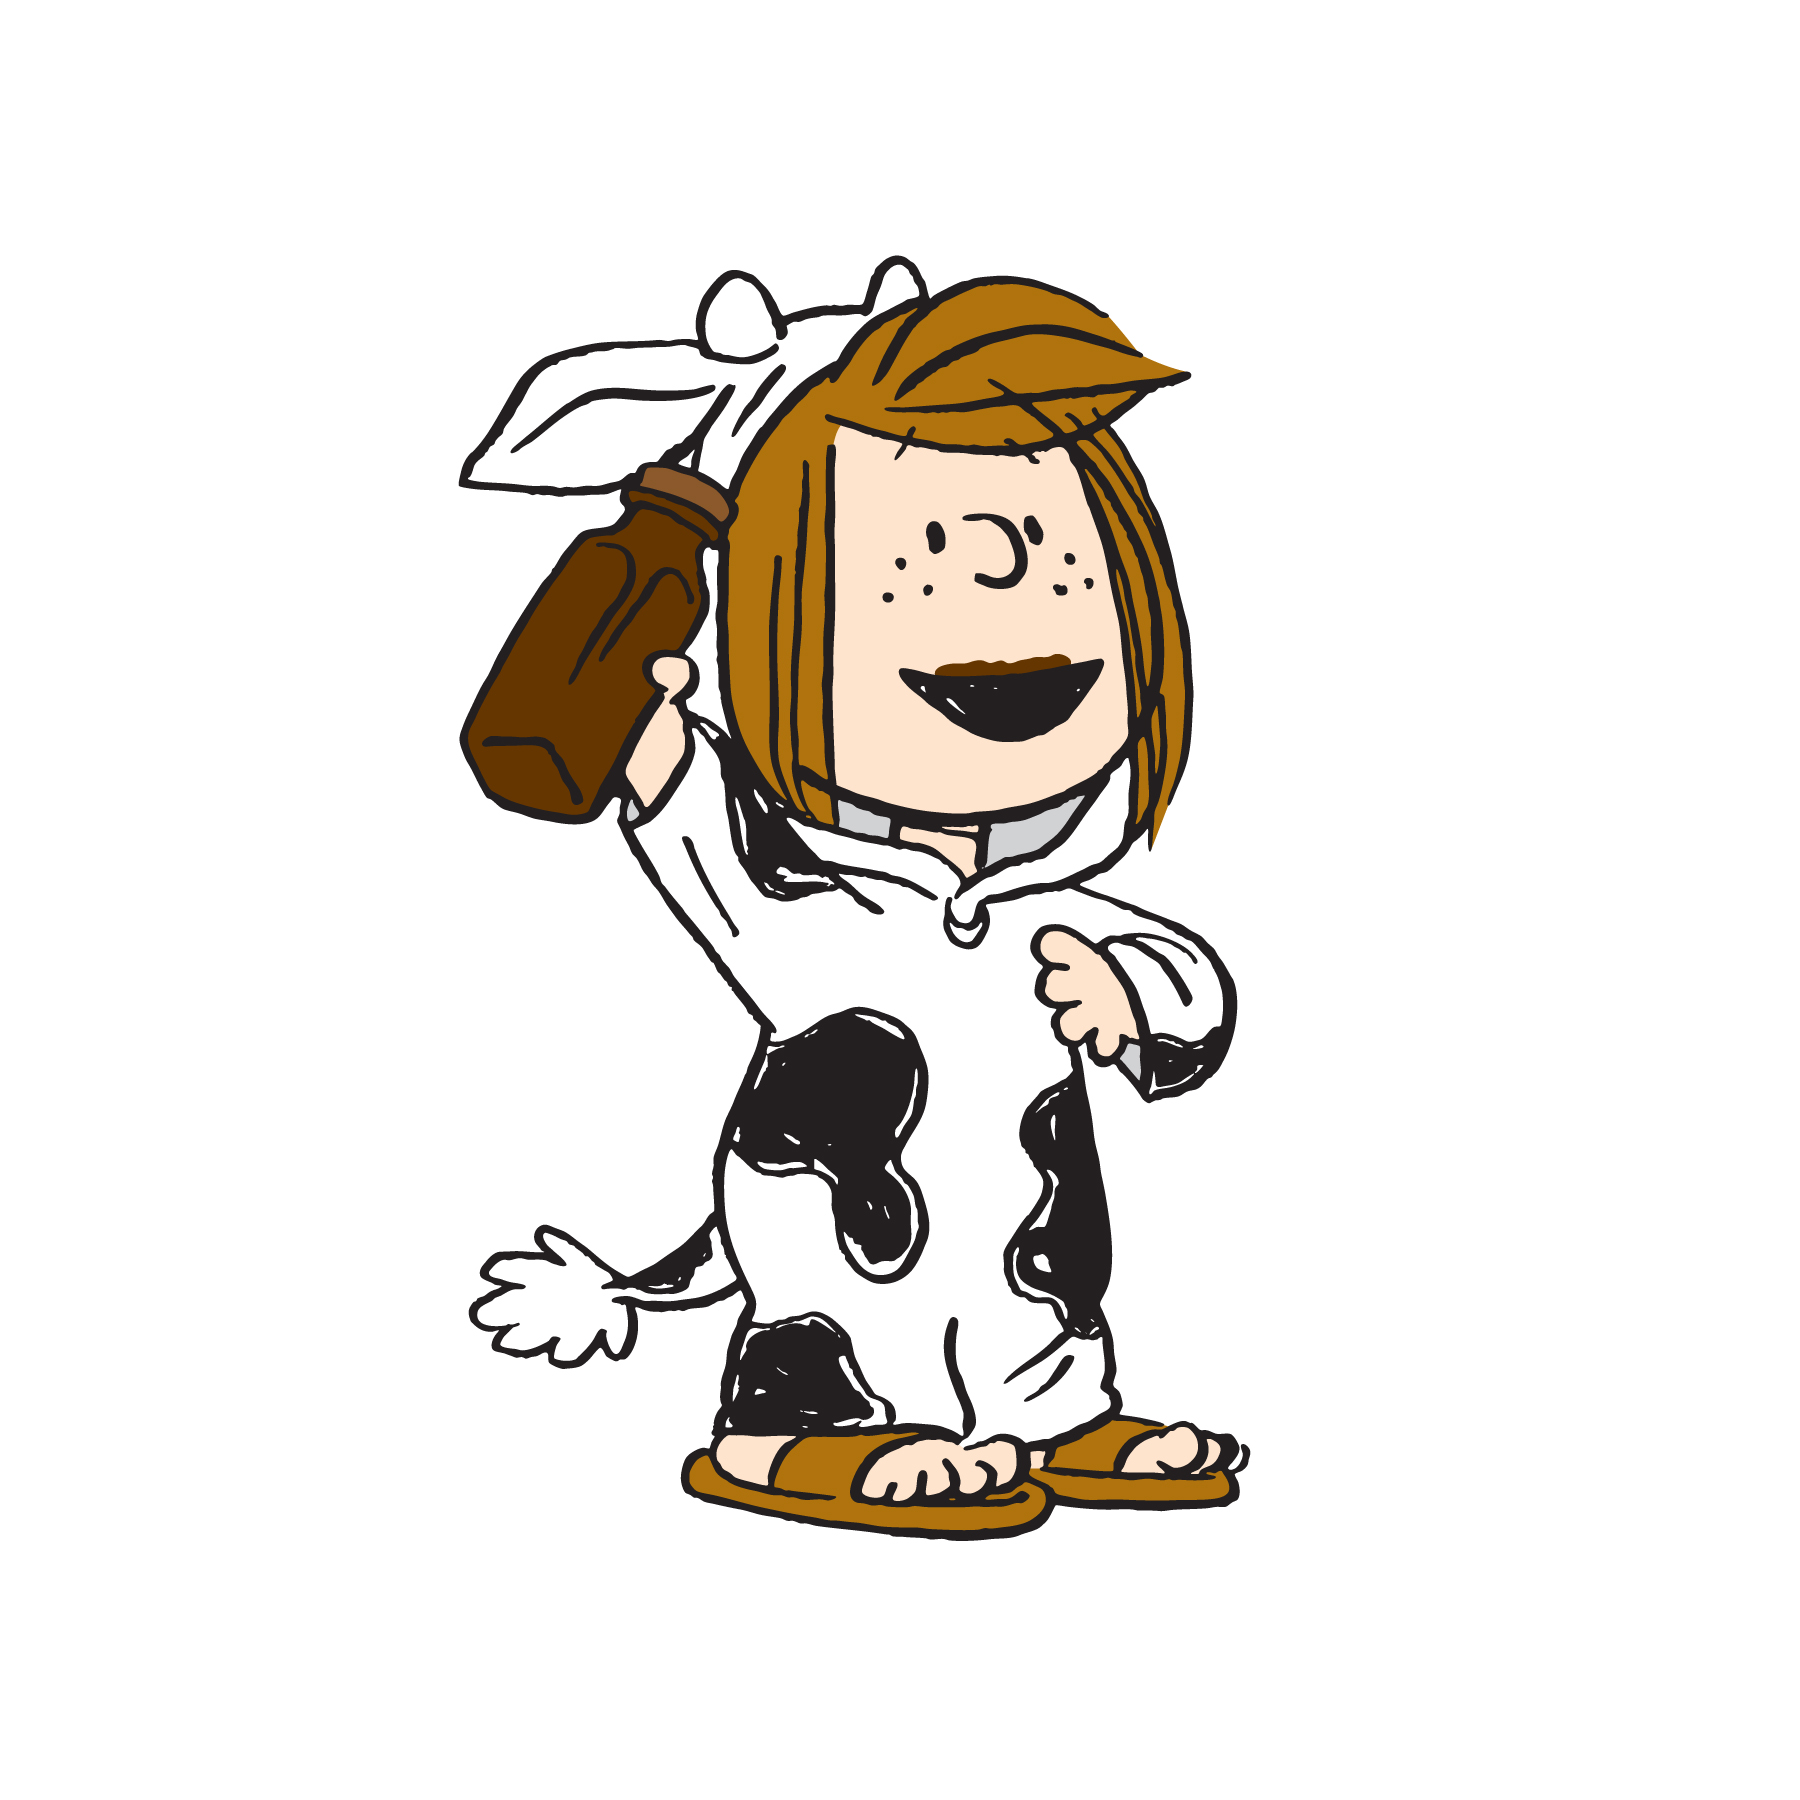 Peppermint Patty Peanuts Quotes.